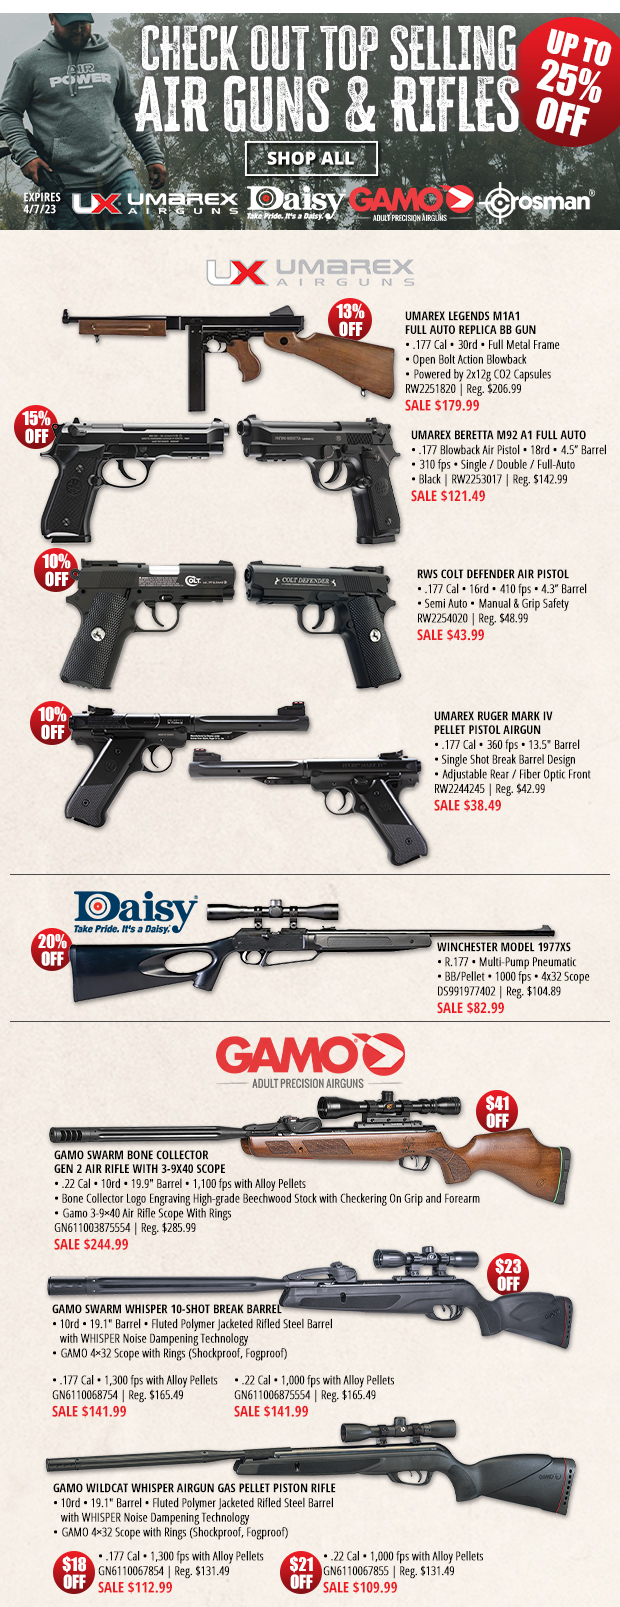 Top Selling Air Guns & Rifles Up to 25% Off